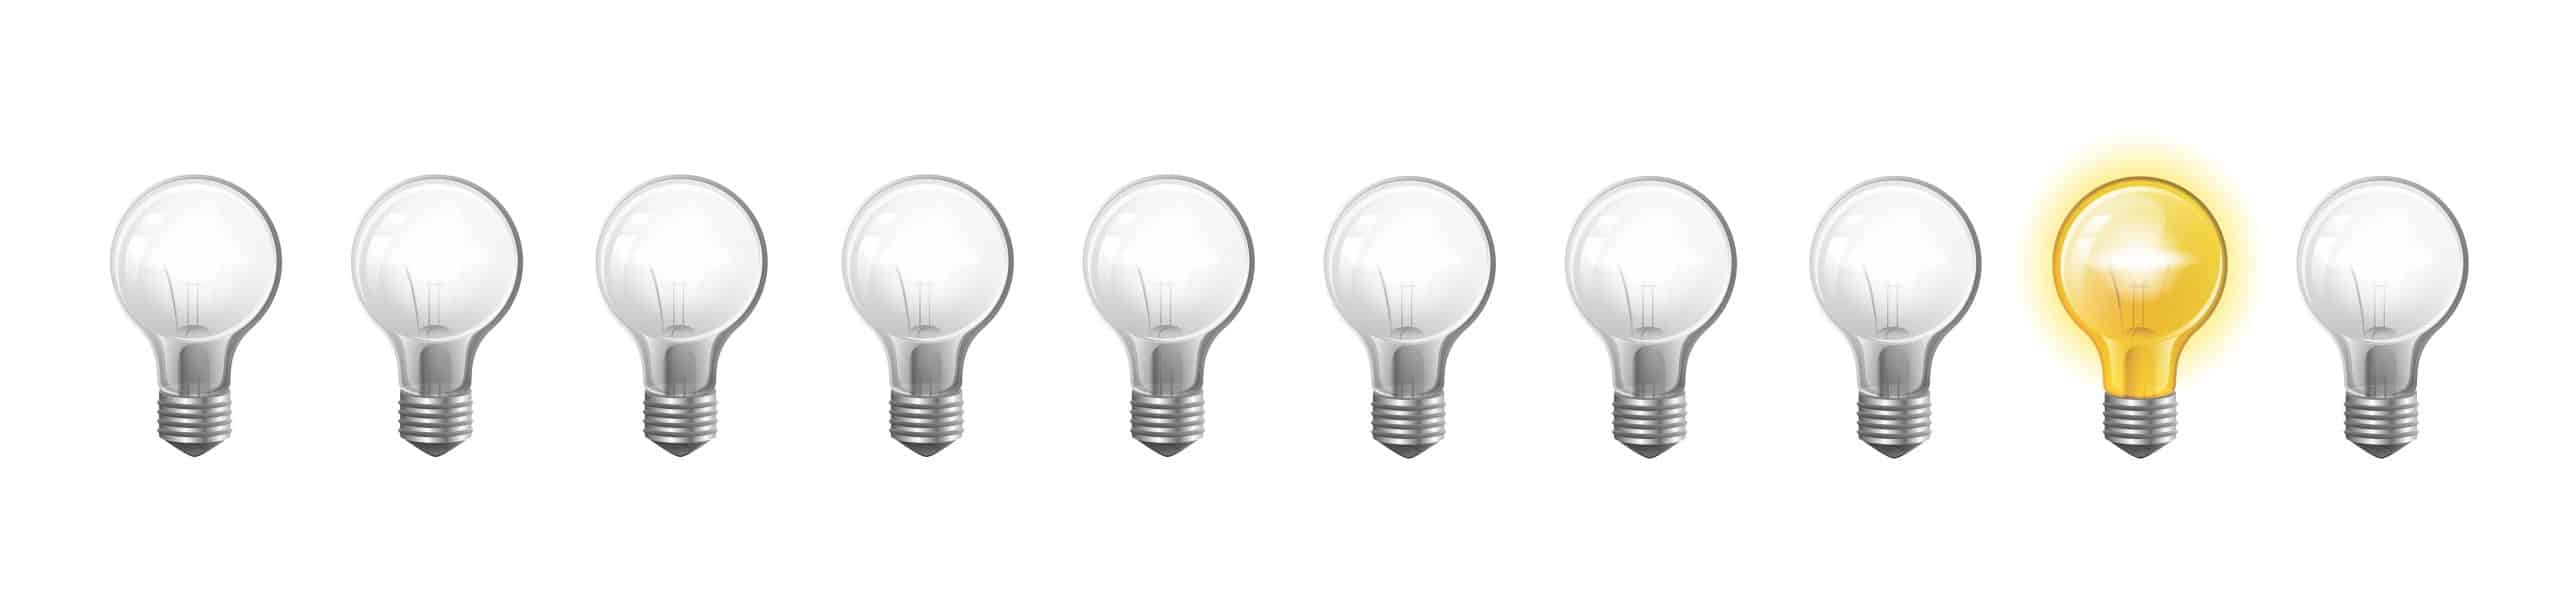 10 light bulbs in a row: 8 off, 1 on, 1 off, to demonstrate originality in dissertation topic selection